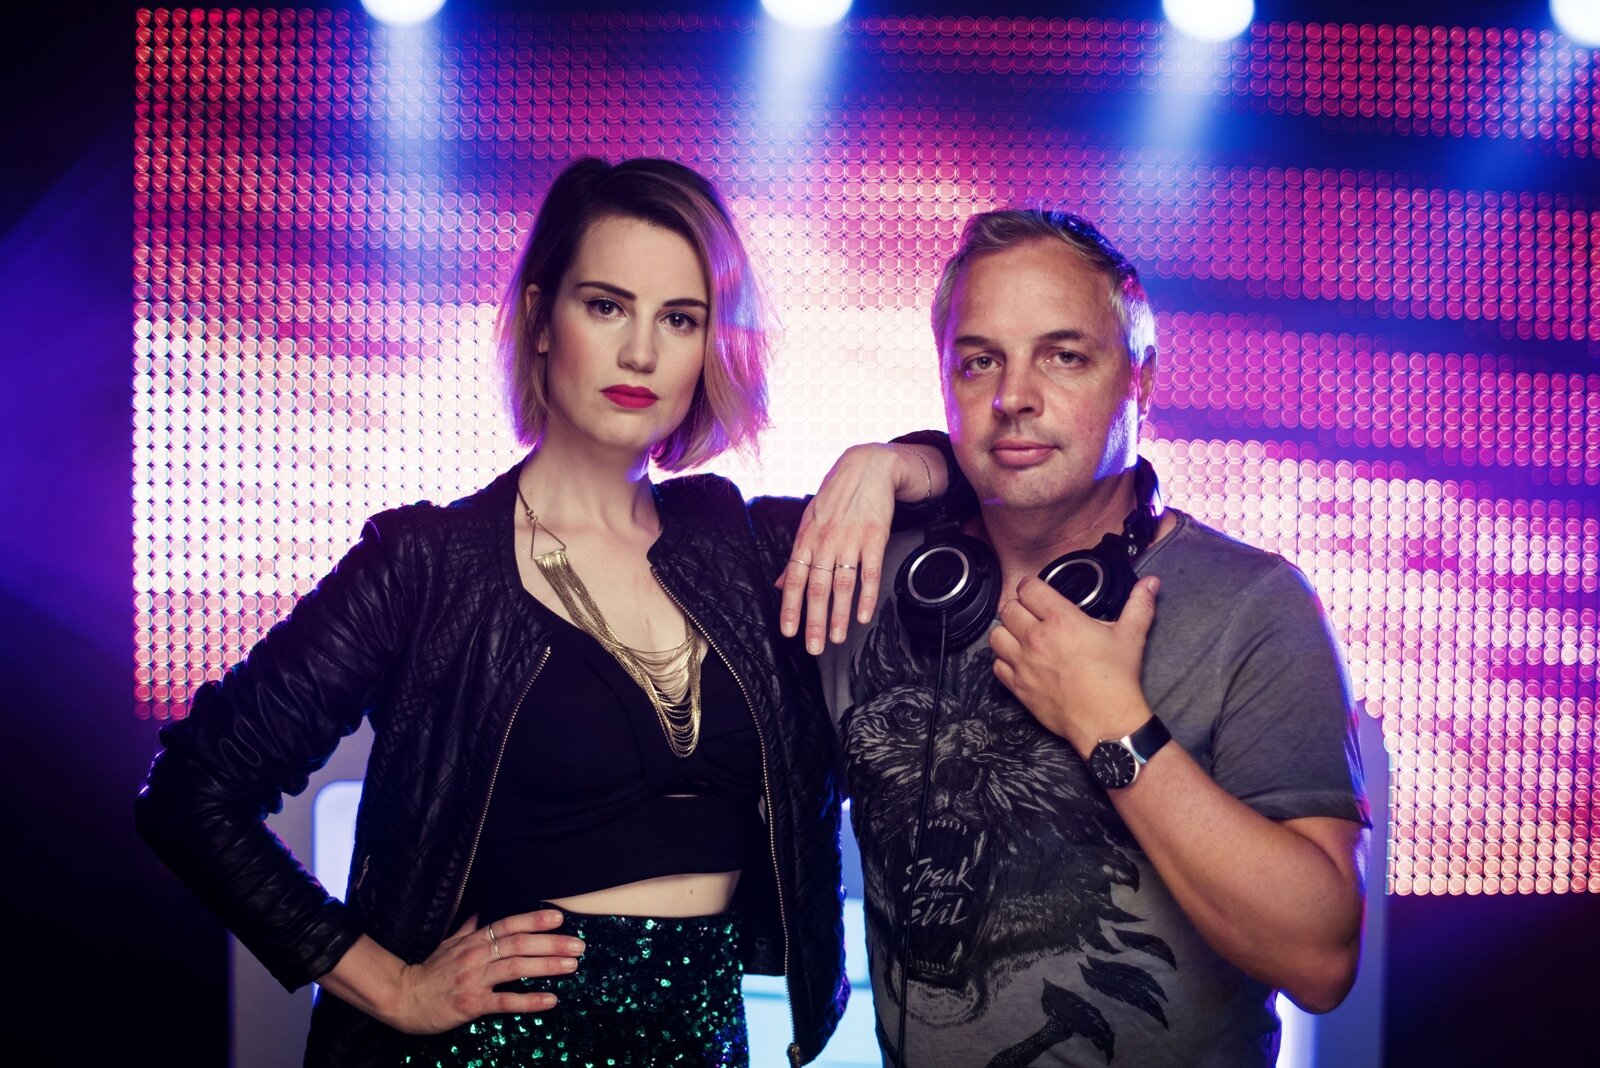 bandshopper.nl-dj-and-lady-laura-dance-show-feest-party.jpg